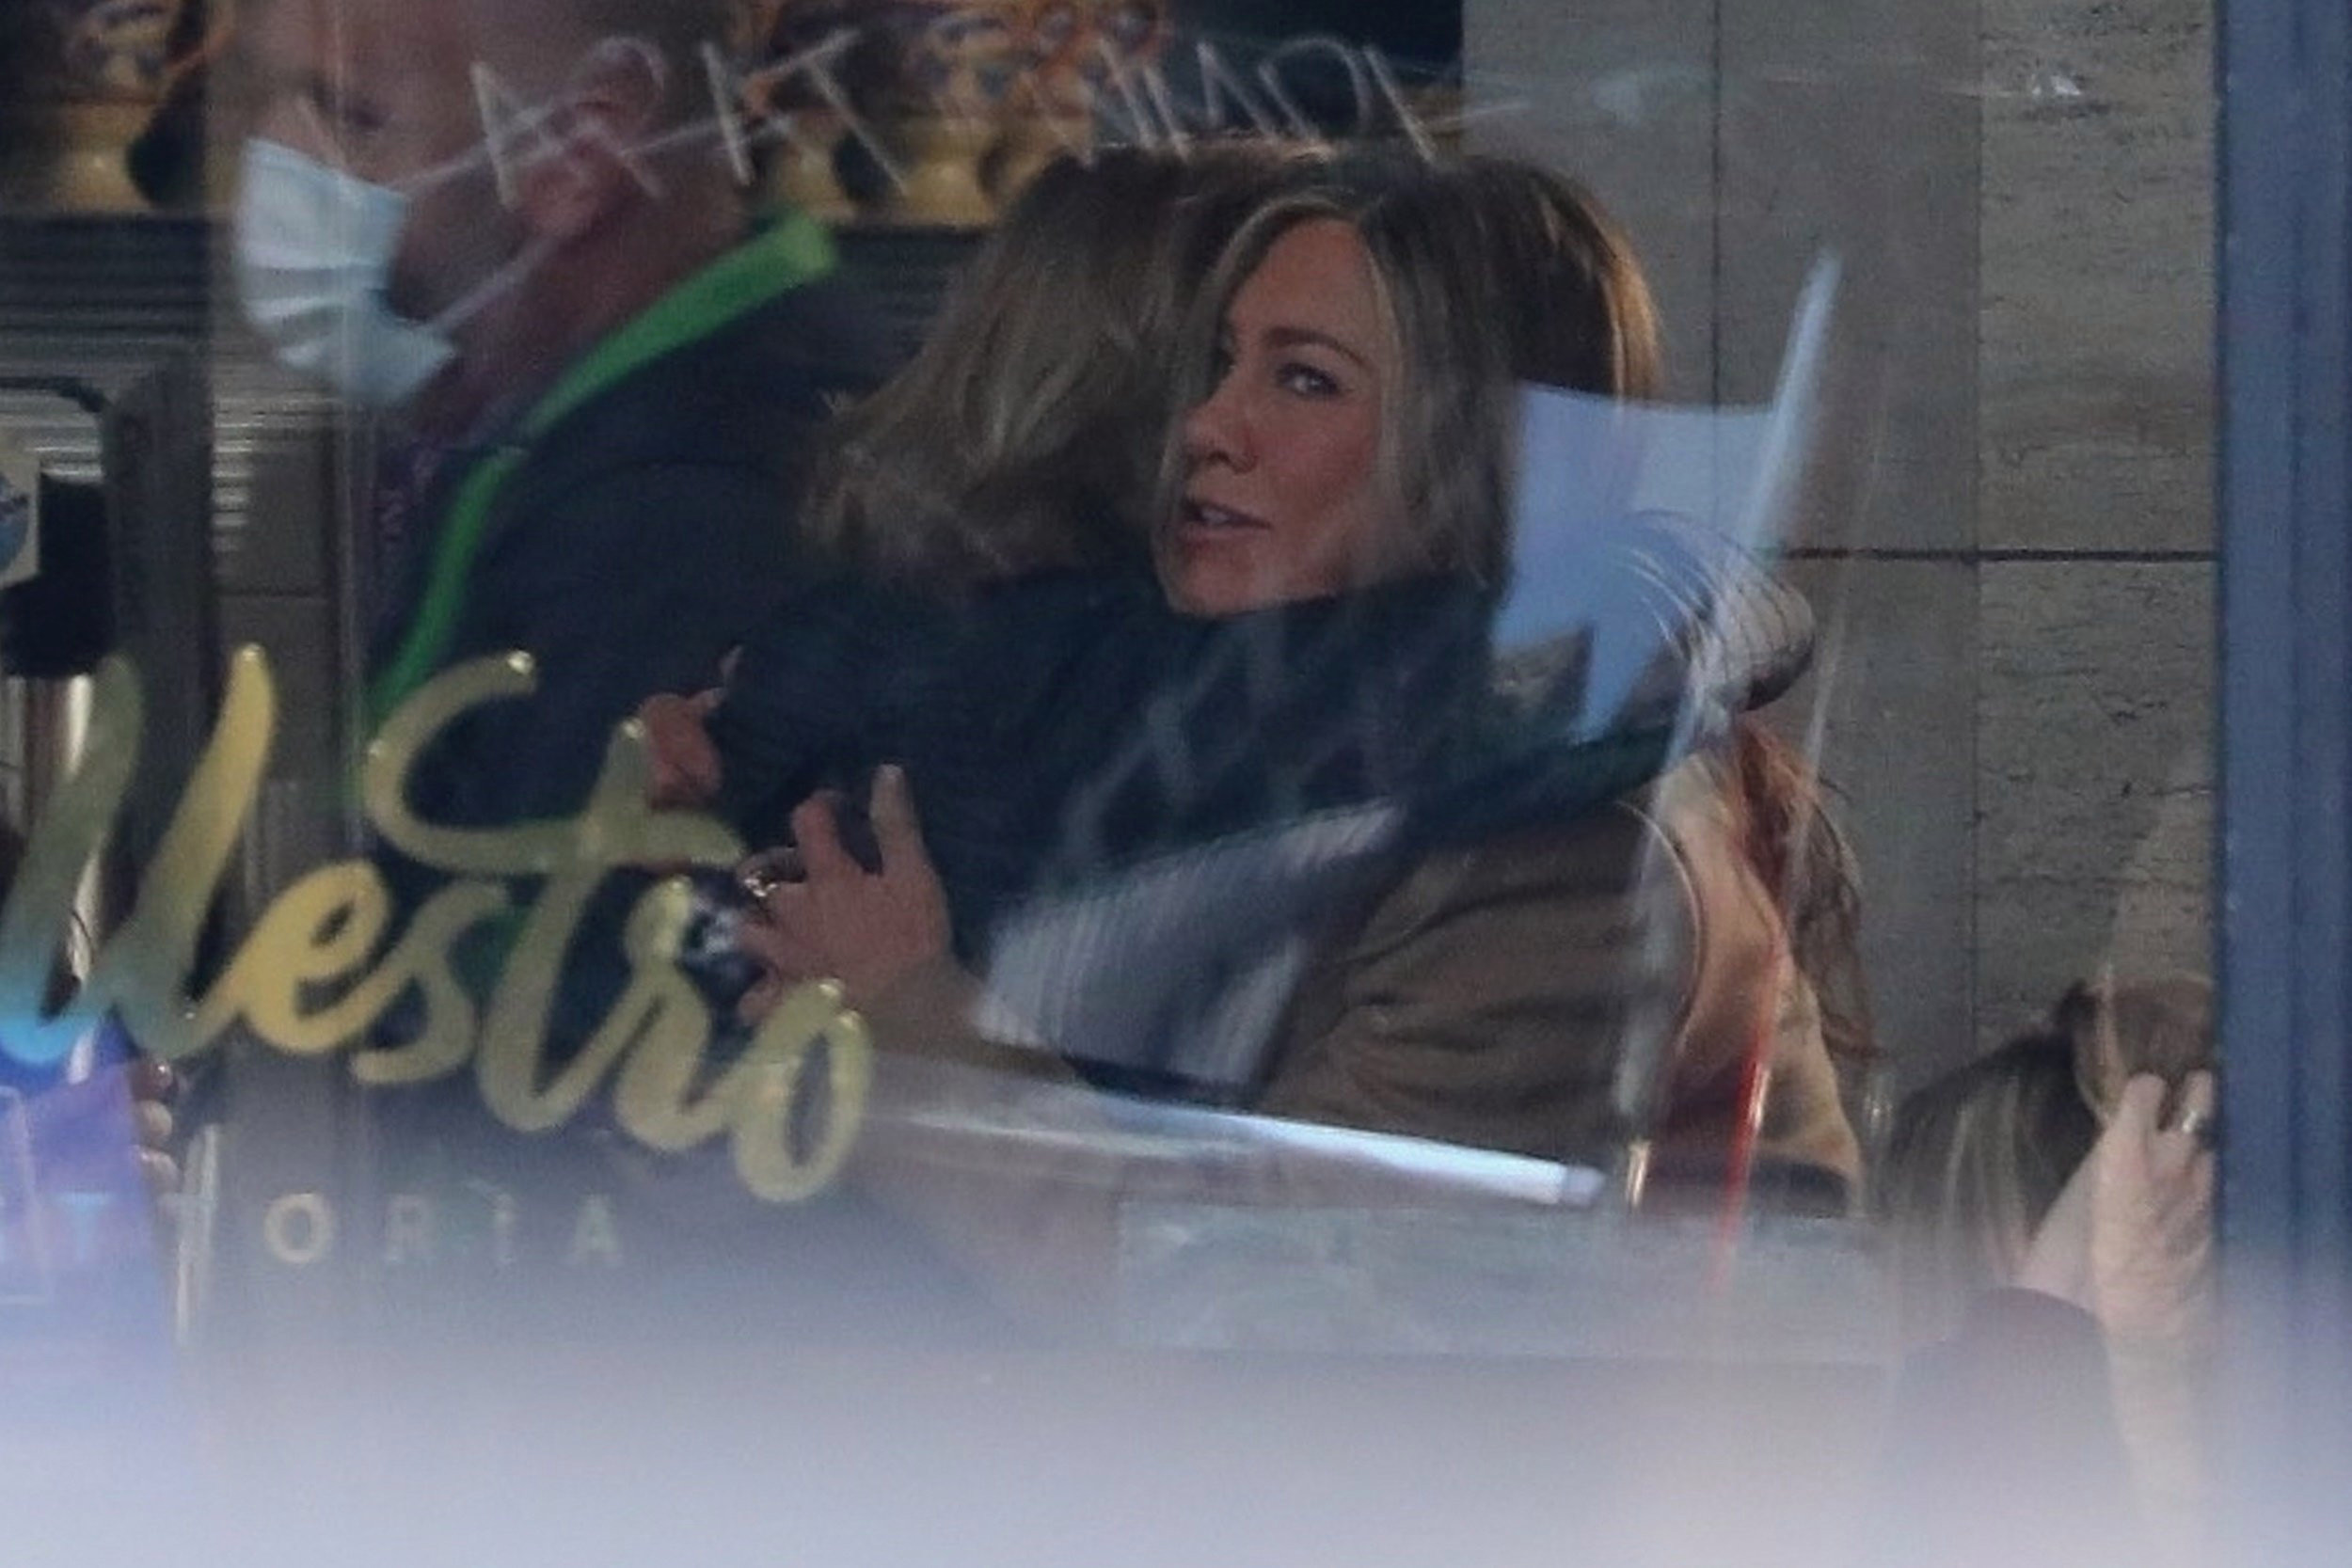 Reese Witherspoon spotted out with Jennifer Aniston on the set of The Morning Show in LA